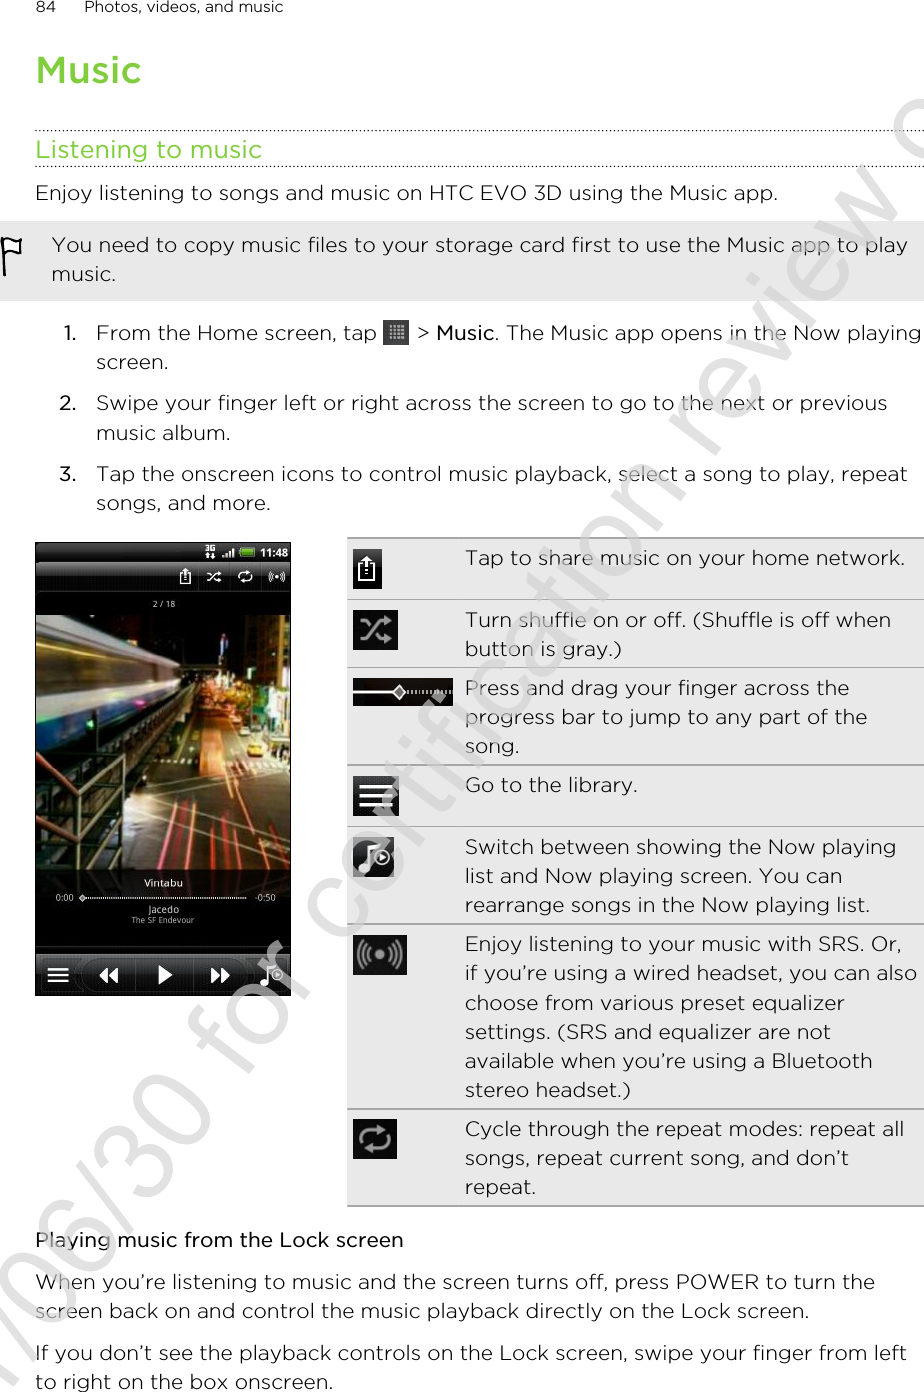 MusicListening to musicEnjoy listening to songs and music on HTC EVO 3D using the Music app.You need to copy music files to your storage card first to use the Music app to playmusic.1. From the Home screen, tap   &gt; Music. The Music app opens in the Now playingscreen.2. Swipe your finger left or right across the screen to go to the next or previousmusic album.3. Tap the onscreen icons to control music playback, select a song to play, repeatsongs, and more.Tap to share music on your home network.Turn shuffle on or off. (Shuffle is off whenbutton is gray.)Press and drag your finger across theprogress bar to jump to any part of thesong.Go to the library.Switch between showing the Now playinglist and Now playing screen. You canrearrange songs in the Now playing list.Enjoy listening to your music with SRS. Or,if you’re using a wired headset, you can alsochoose from various preset equalizersettings. (SRS and equalizer are notavailable when you’re using a Bluetoothstereo headset.)Cycle through the repeat modes: repeat allsongs, repeat current song, and don’trepeat.Playing music from the Lock screenWhen you’re listening to music and the screen turns off, press POWER to turn thescreen back on and control the music playback directly on the Lock screen.If you don’t see the playback controls on the Lock screen, swipe your finger from leftto right on the box onscreen.84 Photos, videos, and music2011/06/30 for certification review only